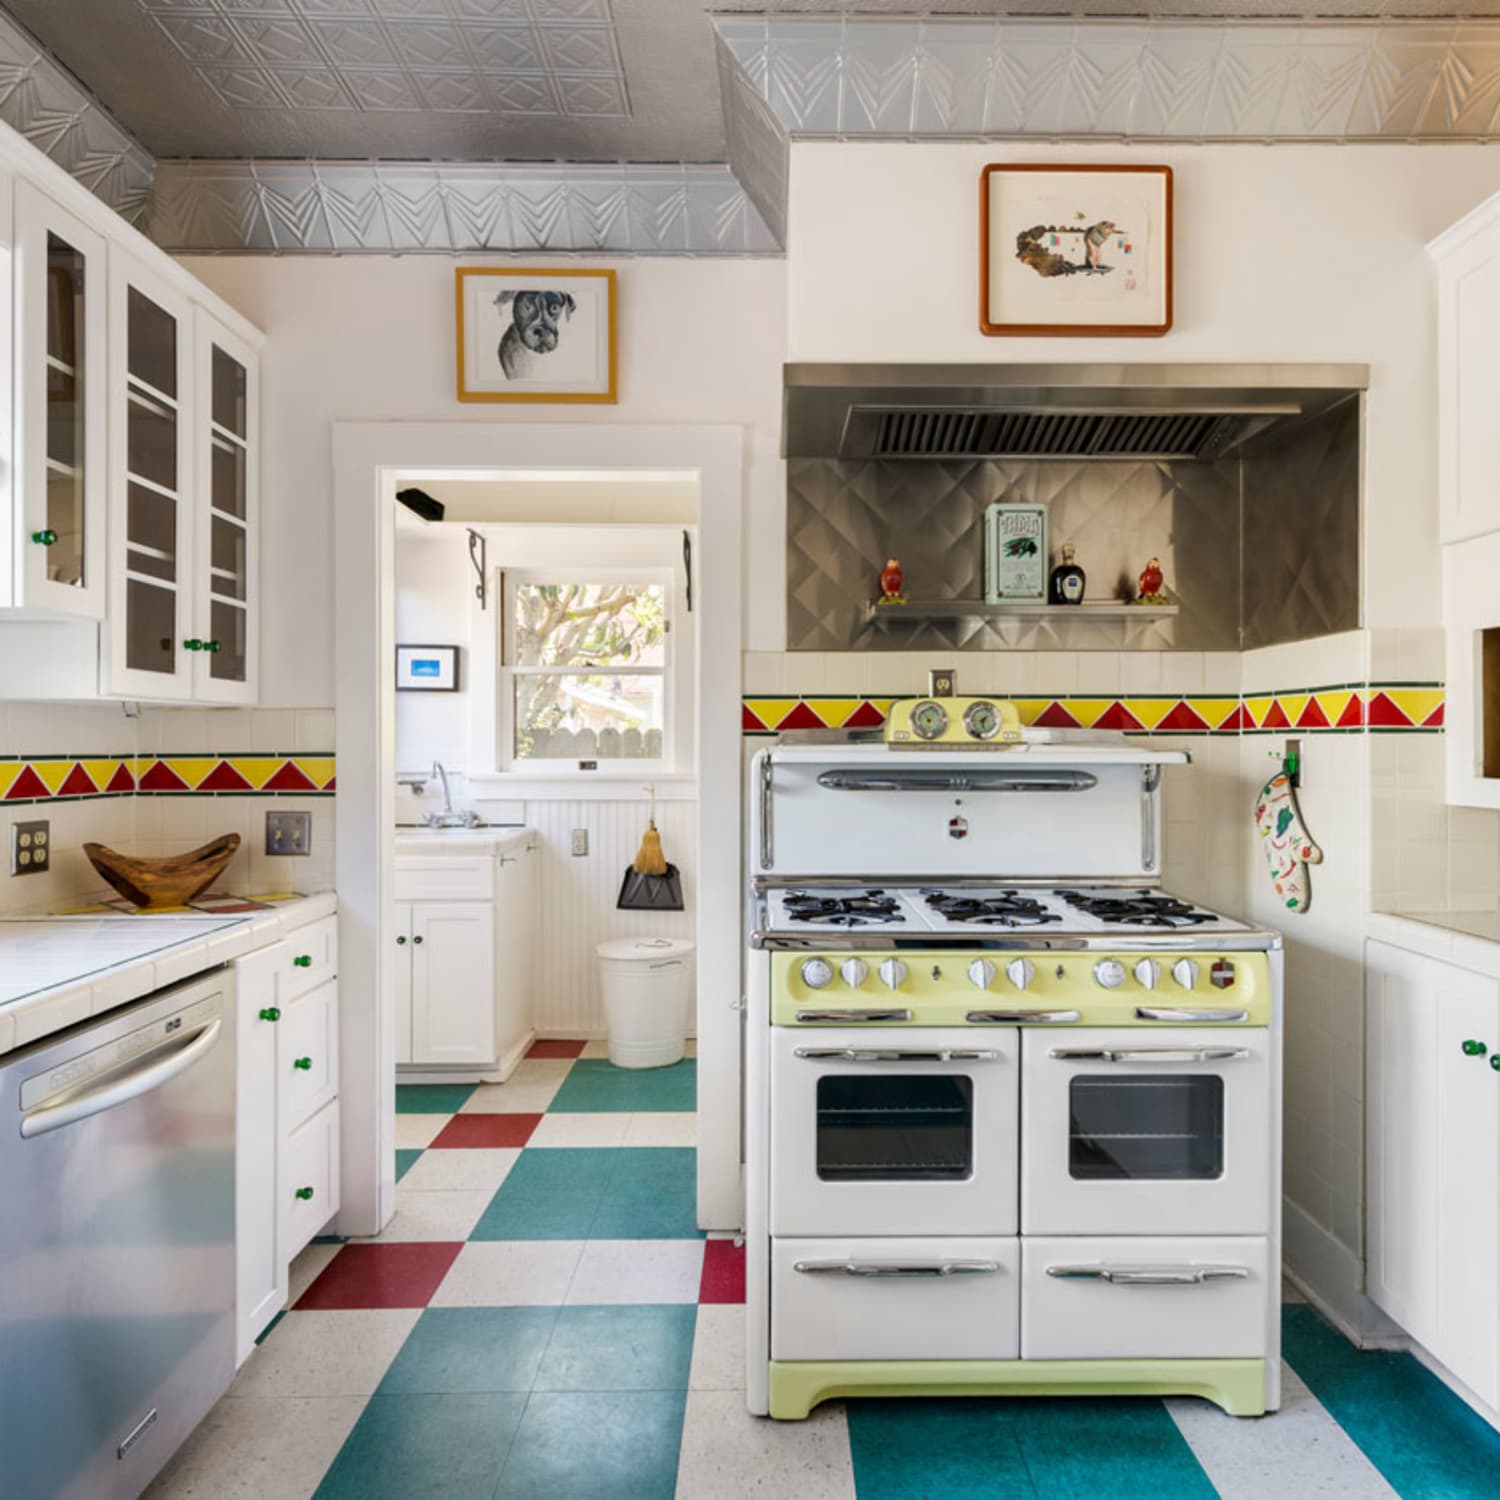 The World's Most Beautiful Stove (+ All About the Portland Kitchen